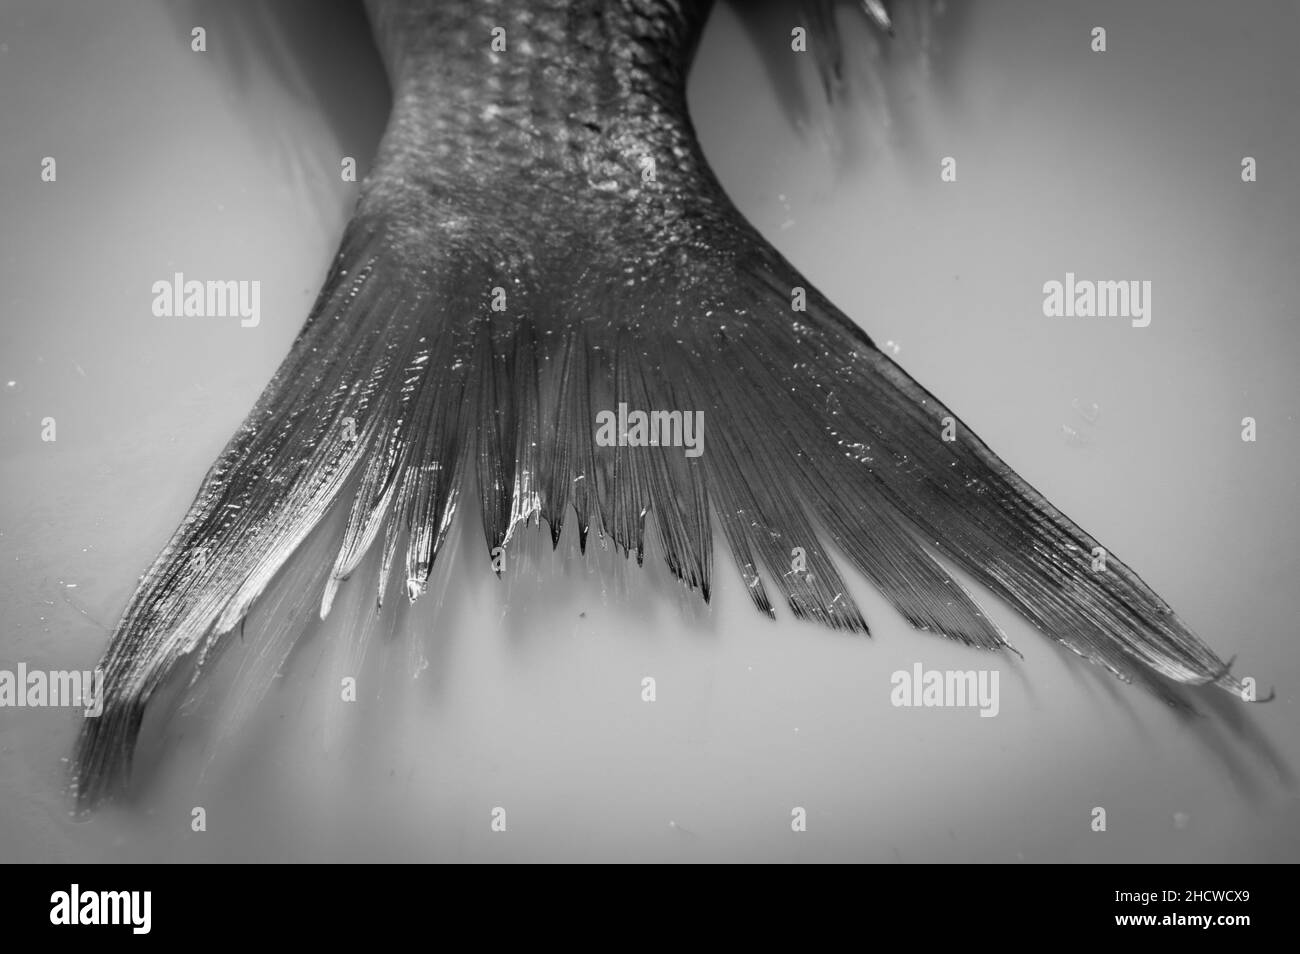 Tail of raw saltwater fish Dentex Dentex, common dentex on a white plate, black and white concept Stock Photo